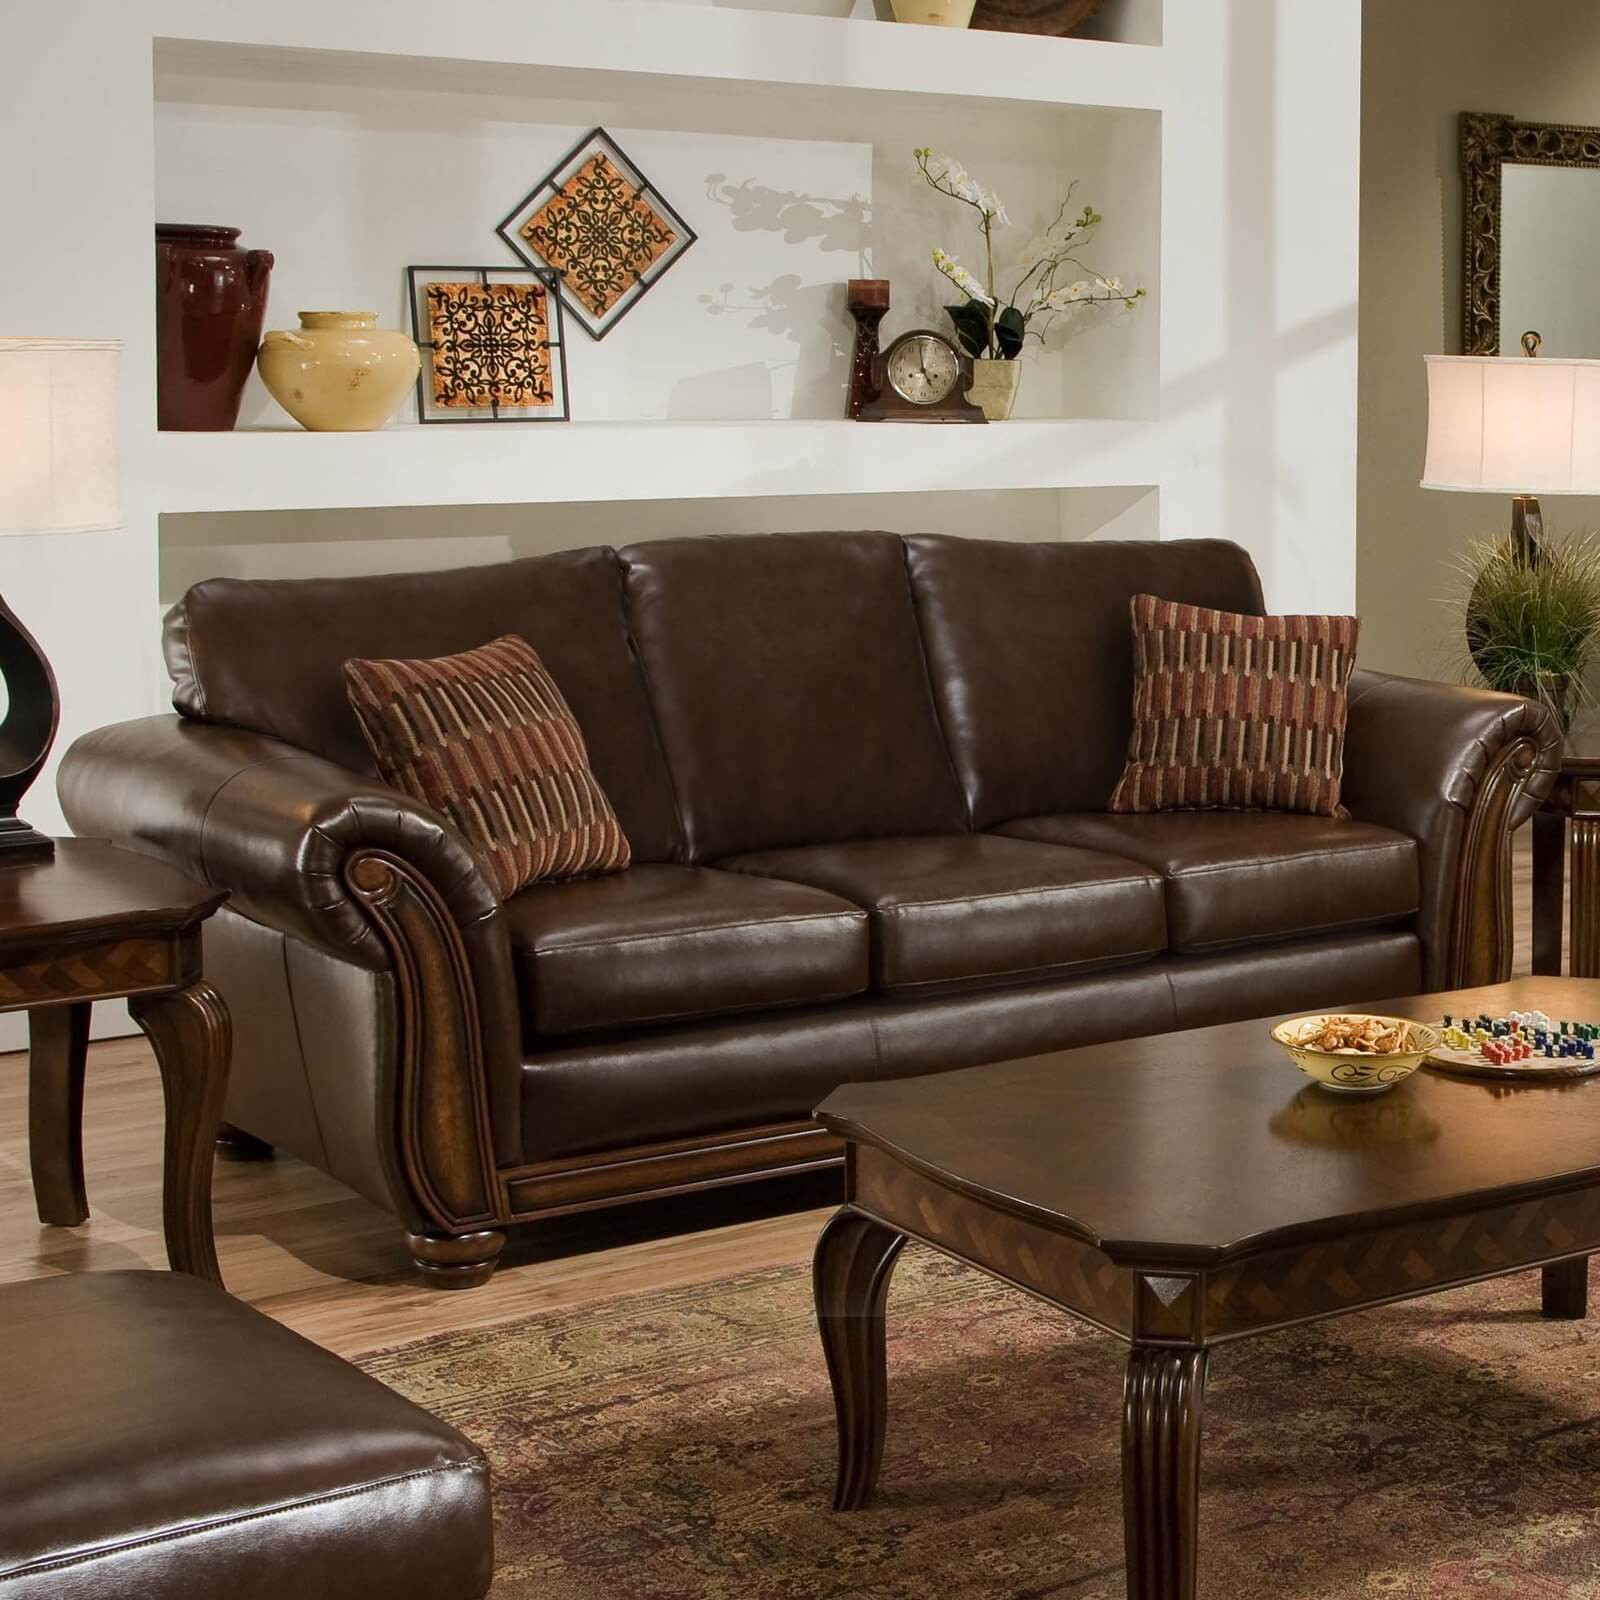 Living Rooms Ideas Brown Sofa
 20 fortable Living Room Sofas Many Styles